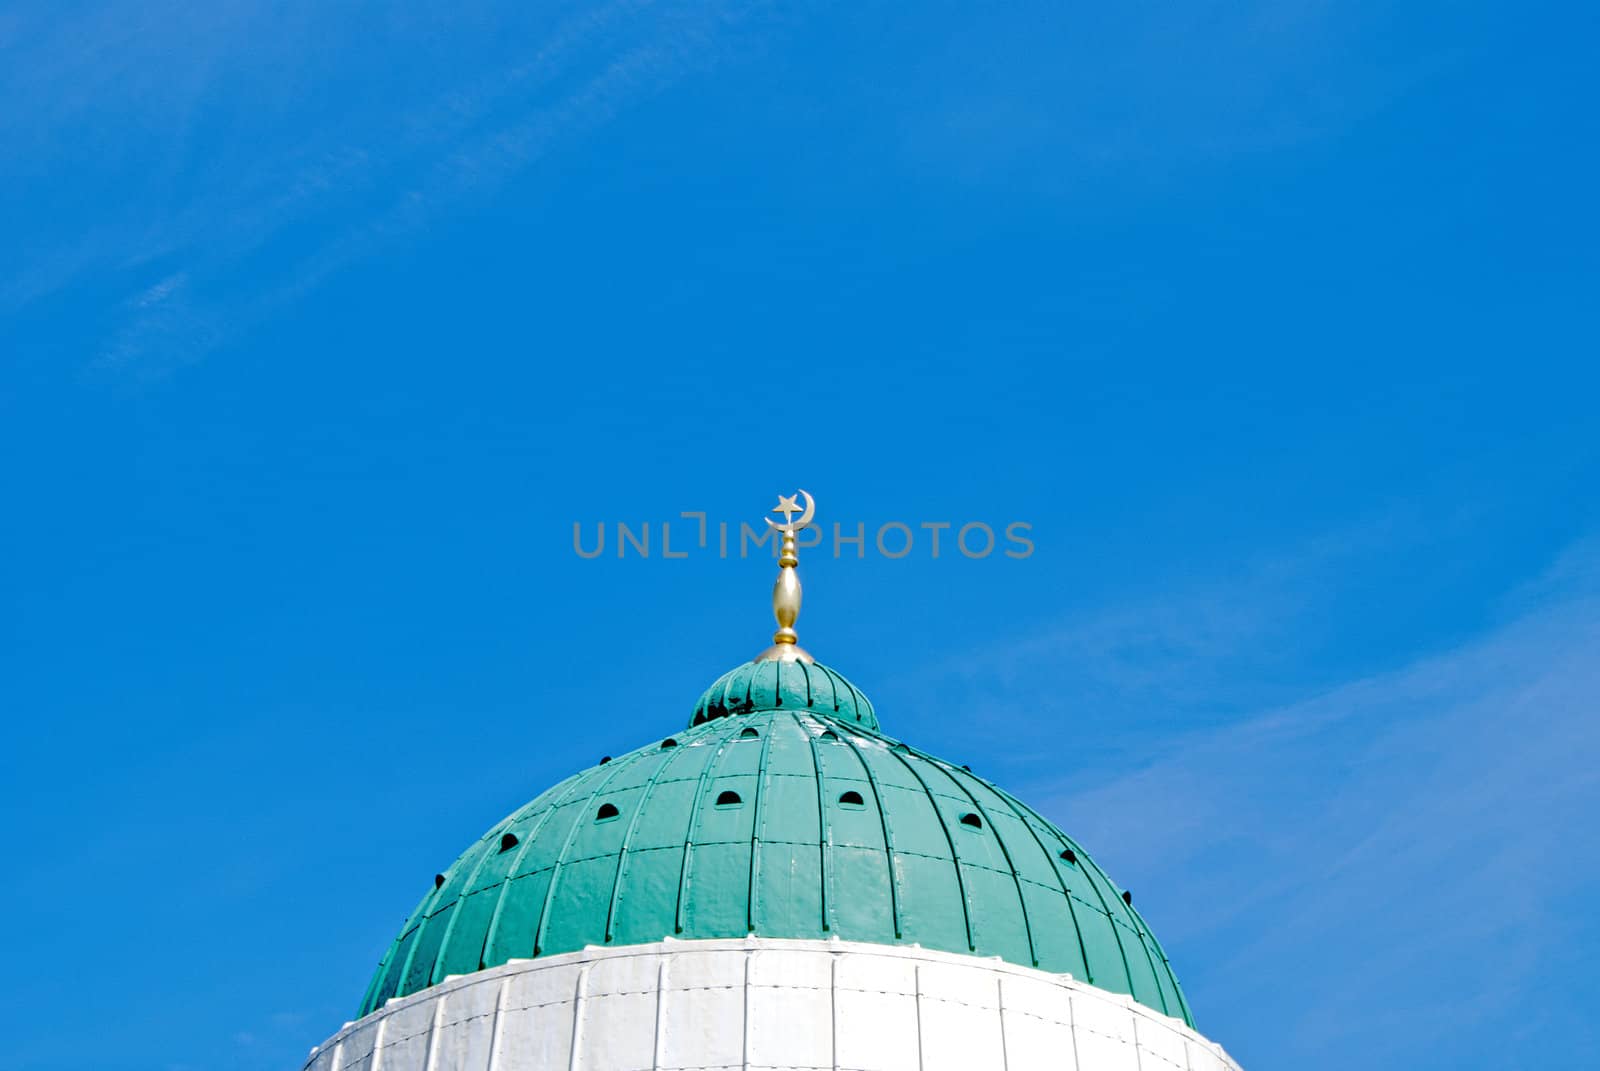 Dome of a Mosque by d40xboy